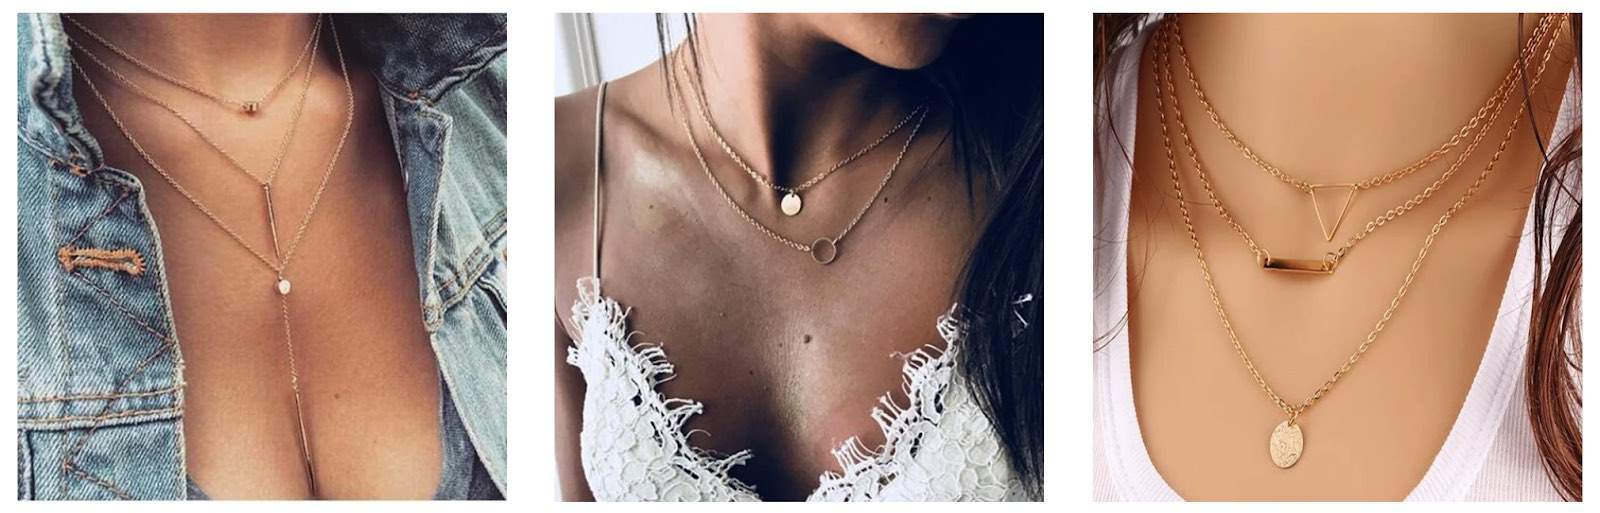 My Better Dreams | Neck models with gorgeous necklaces | Brands on Afluencer